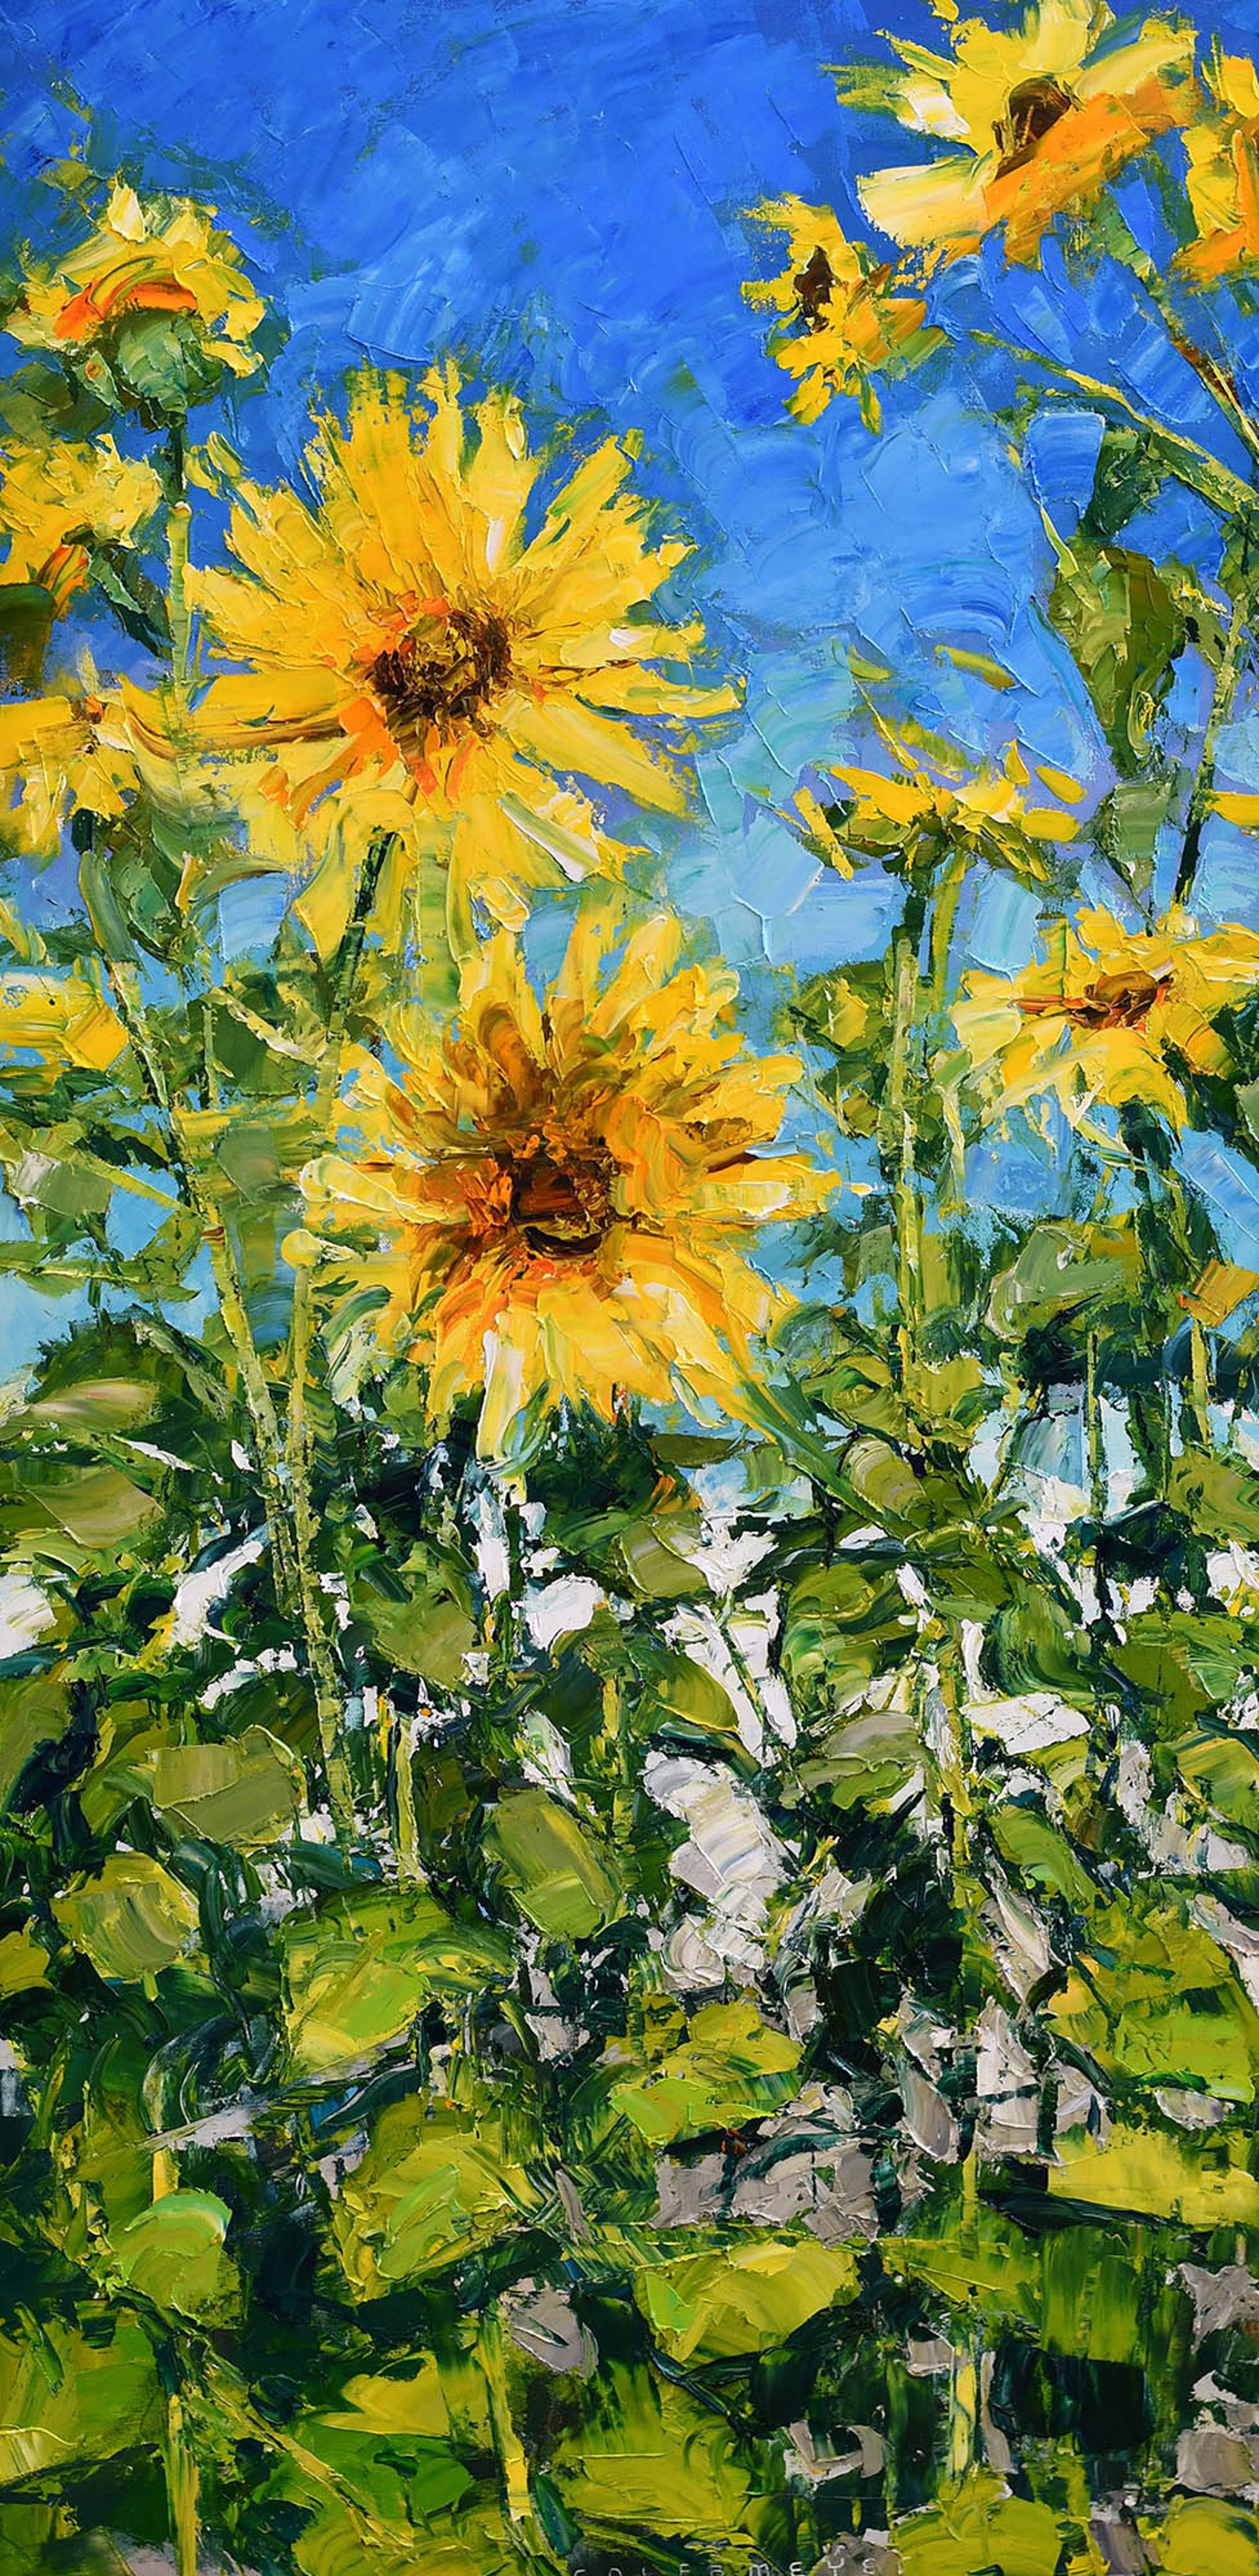 Original Oil Painting Featuring A Field Of Sunflowers Against Blue Sky